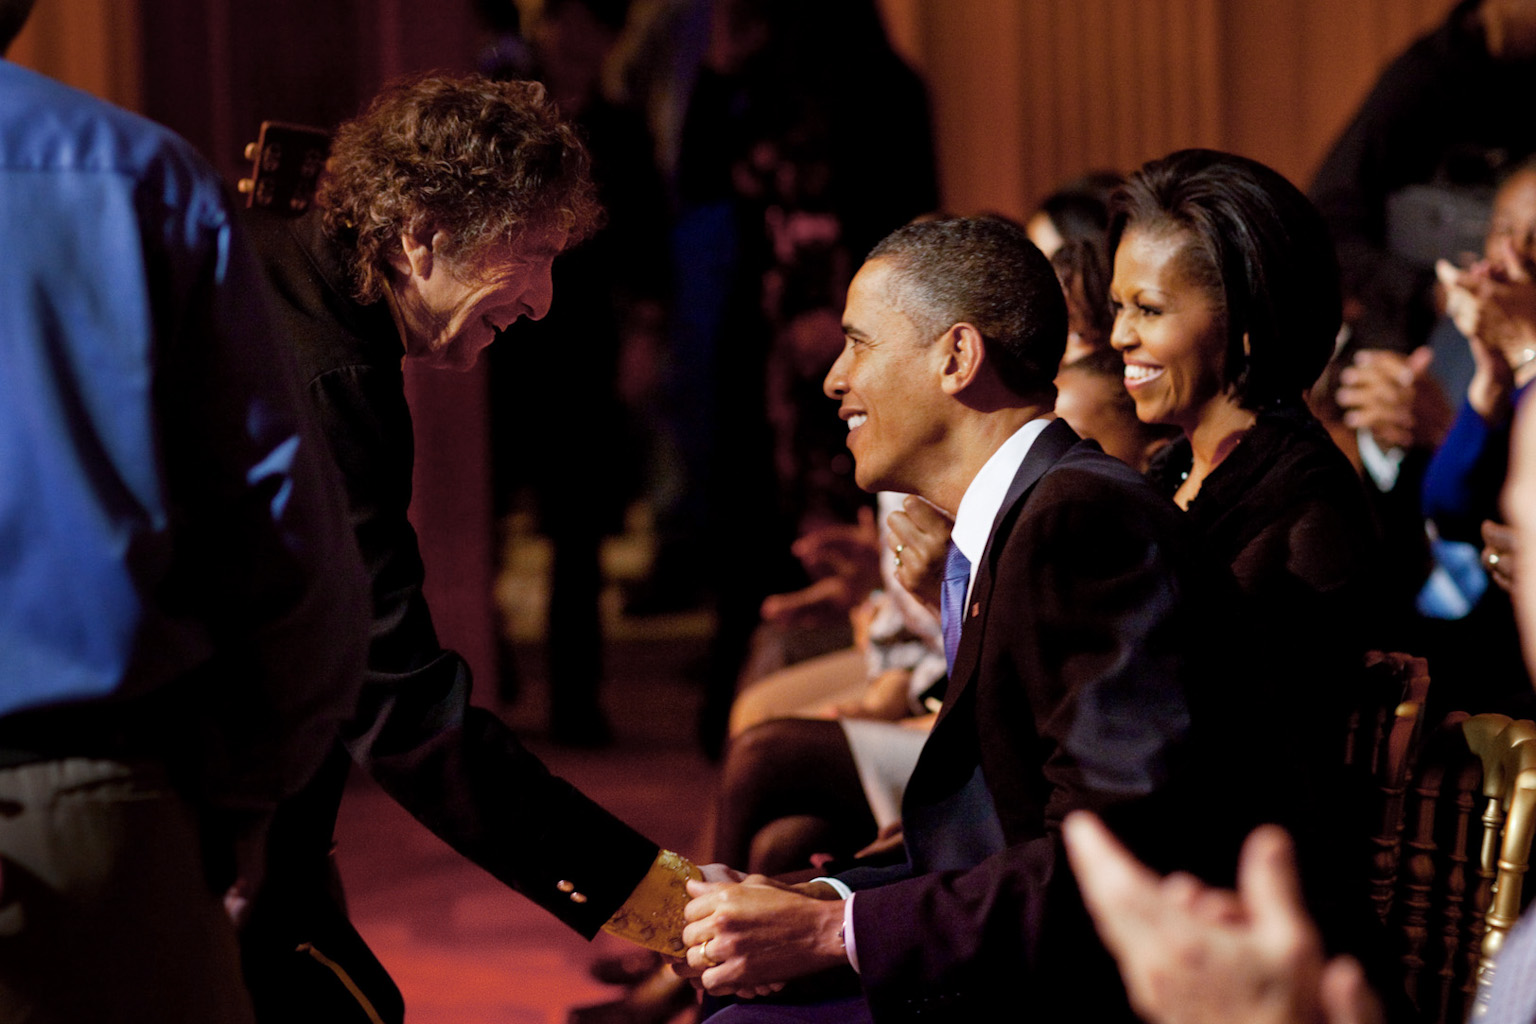 Bob Dylan shakes President Barack Obama's hand following his performance at the "In Performance At The White House: A Celebration Of Music From The Civil Rights Movement" concert in the East Room of the White House, Feb. 9, 2010. (Official White House Photo by Pete Souza)